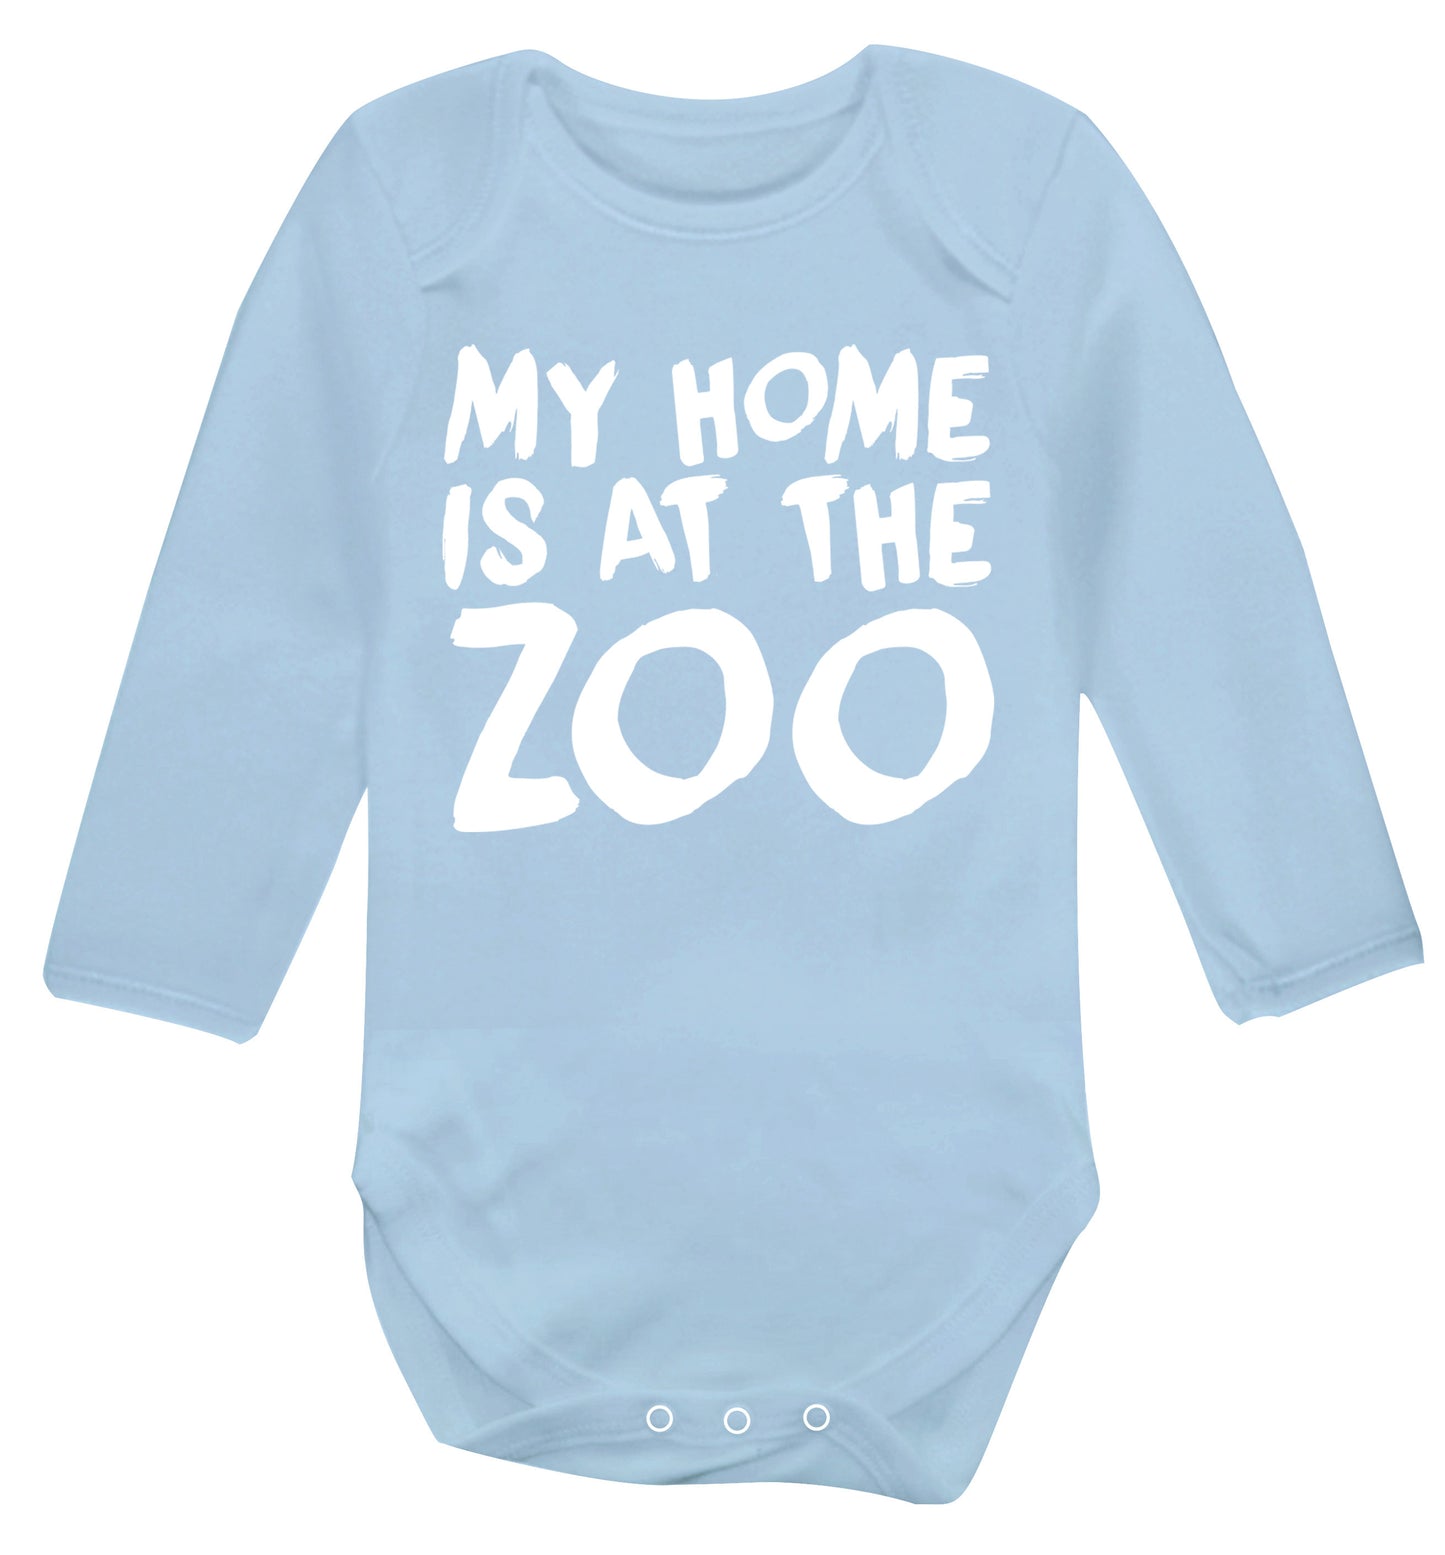 My home is at the zoo Baby Vest long sleeved pale blue 6-12 months